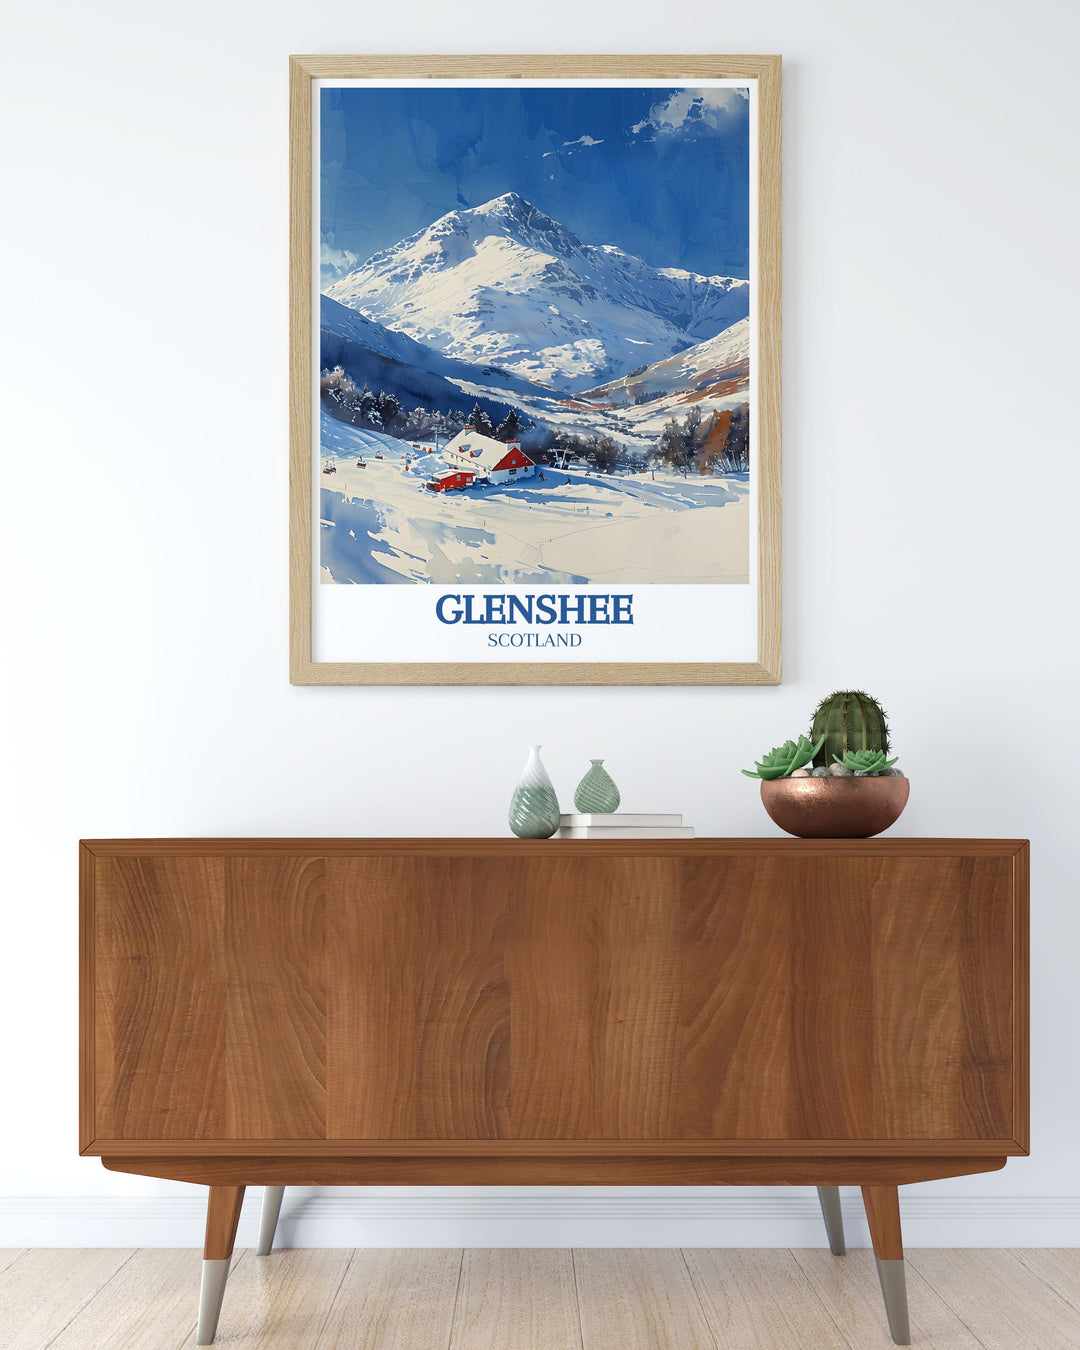 Featuring the dramatic scenery of the Grampian Mountains, this travel poster celebrates their rugged beauty and rich history. Perfect for those who love the outdoors, this piece captures the essence of Scotlands highlands.